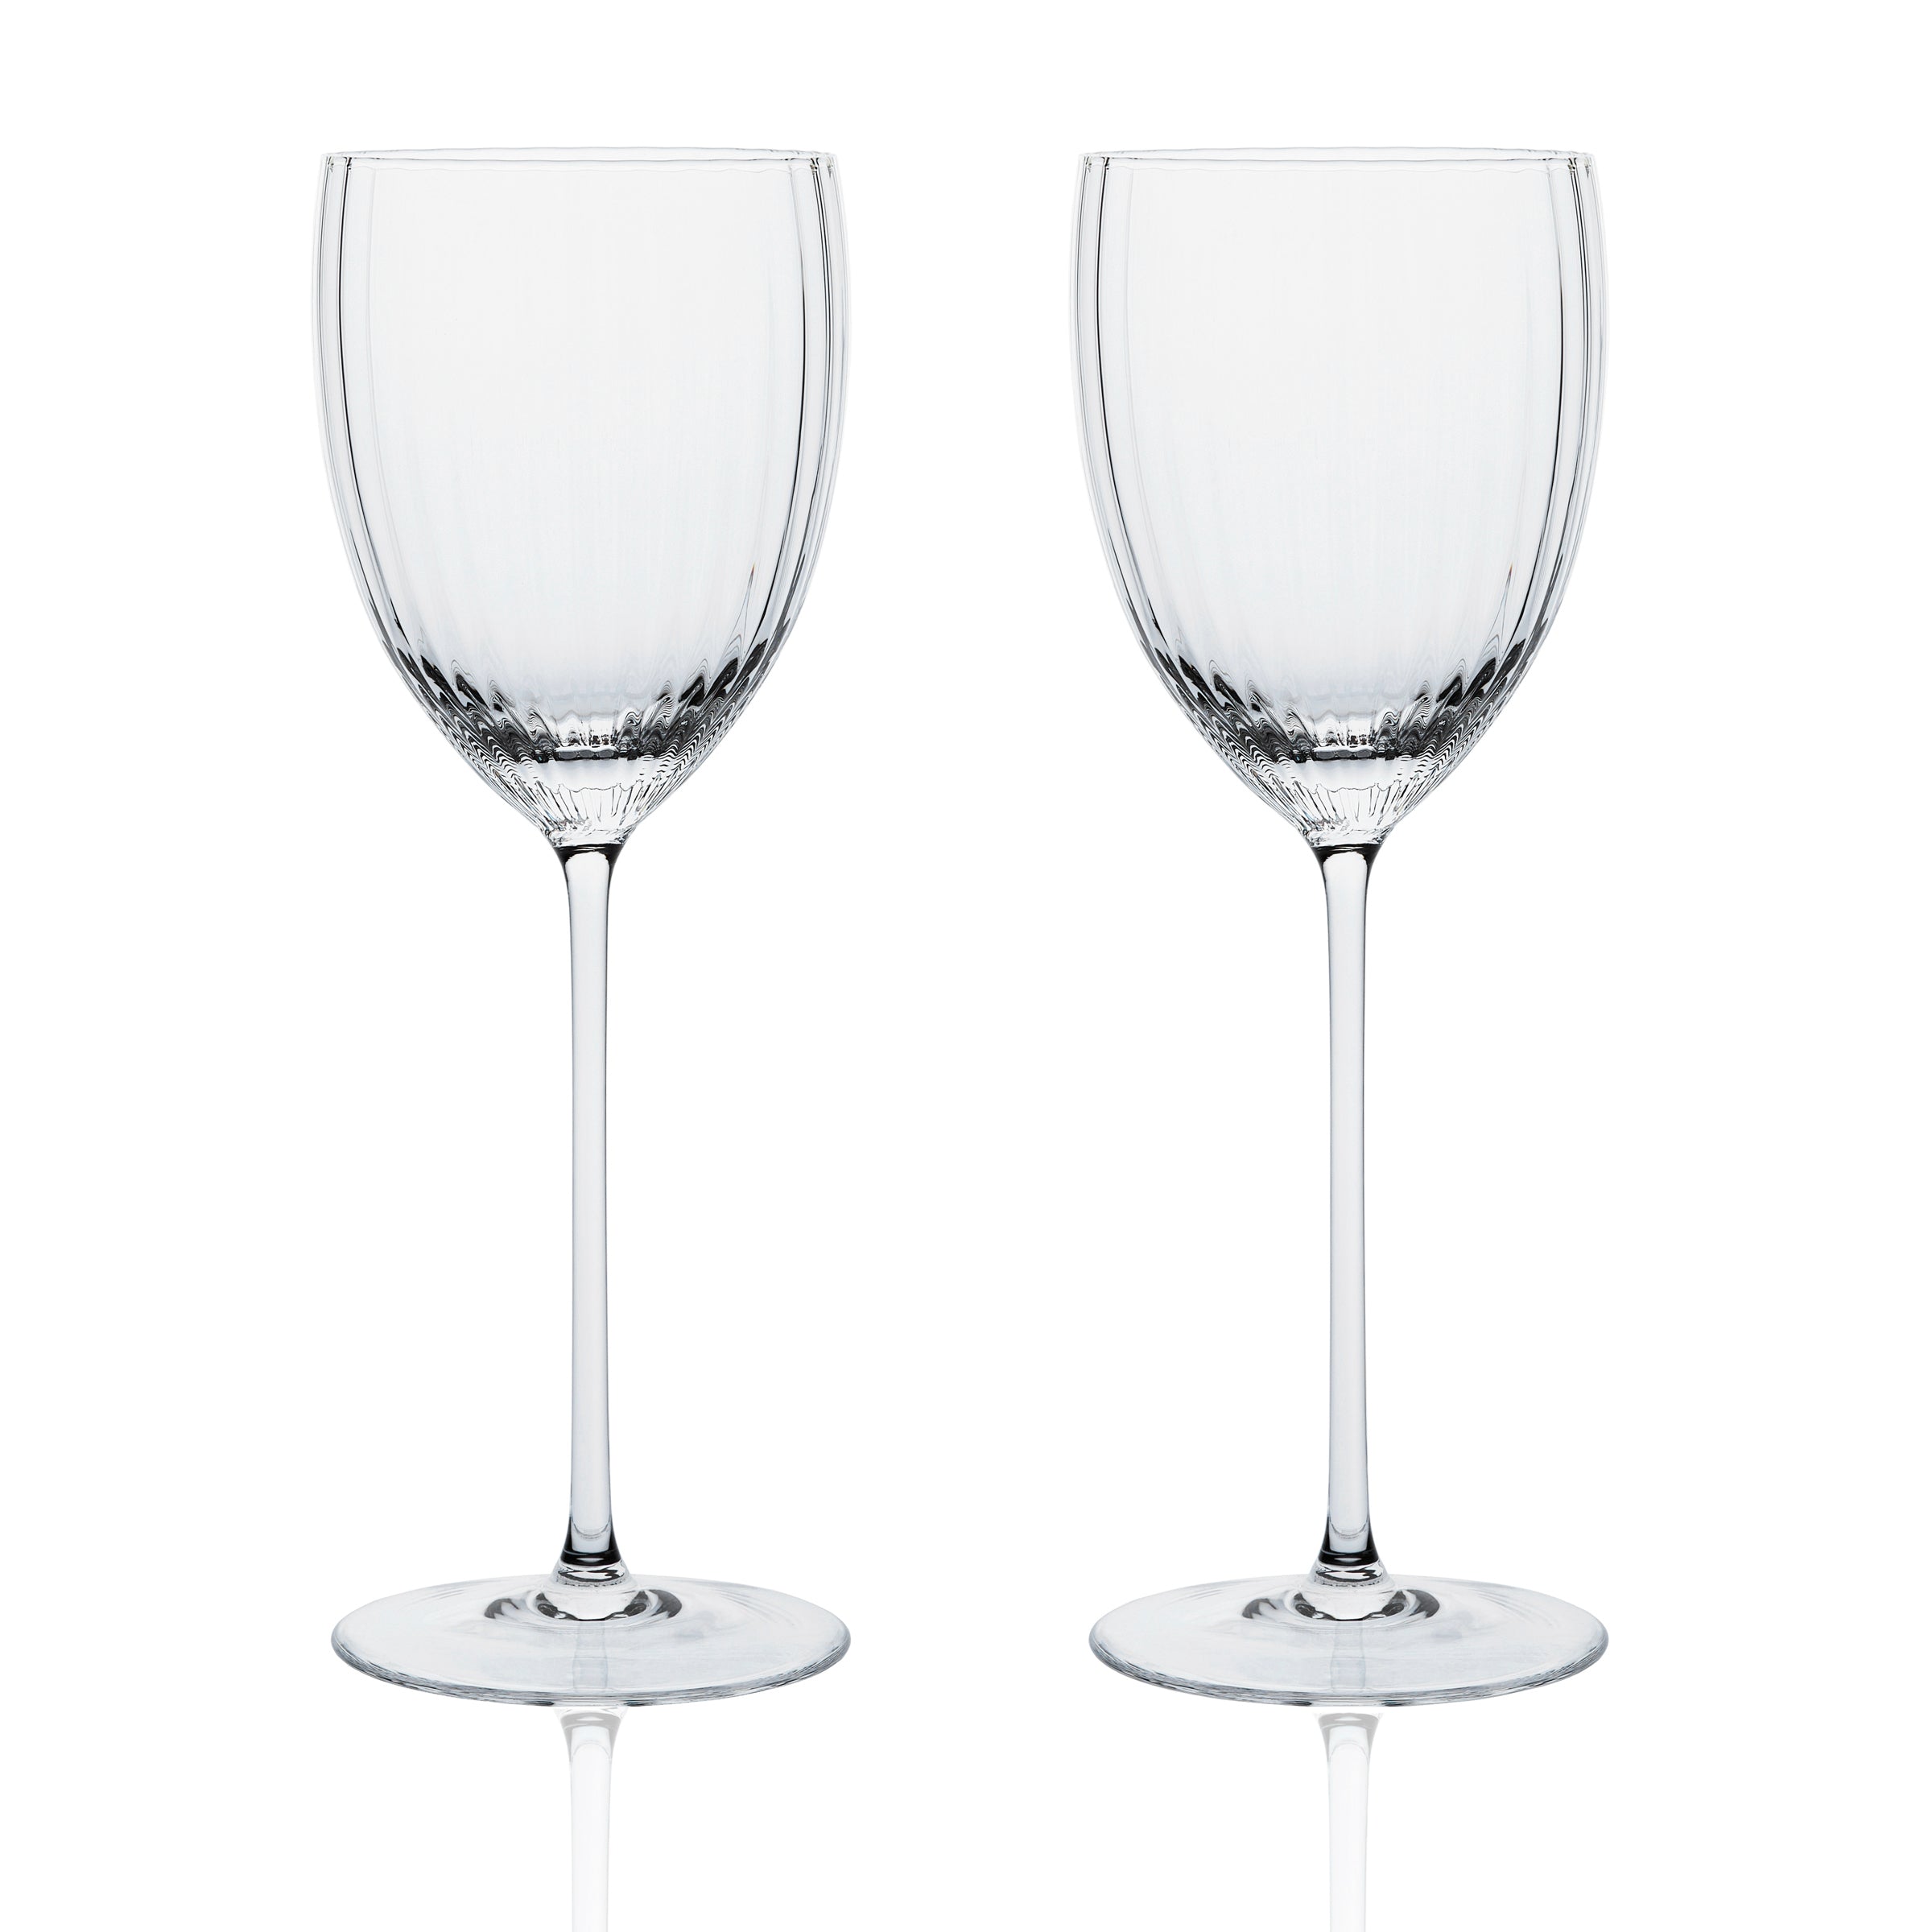 Wine Glasses Set of 2, Large Wine Glasses, Crystal Clear Glass